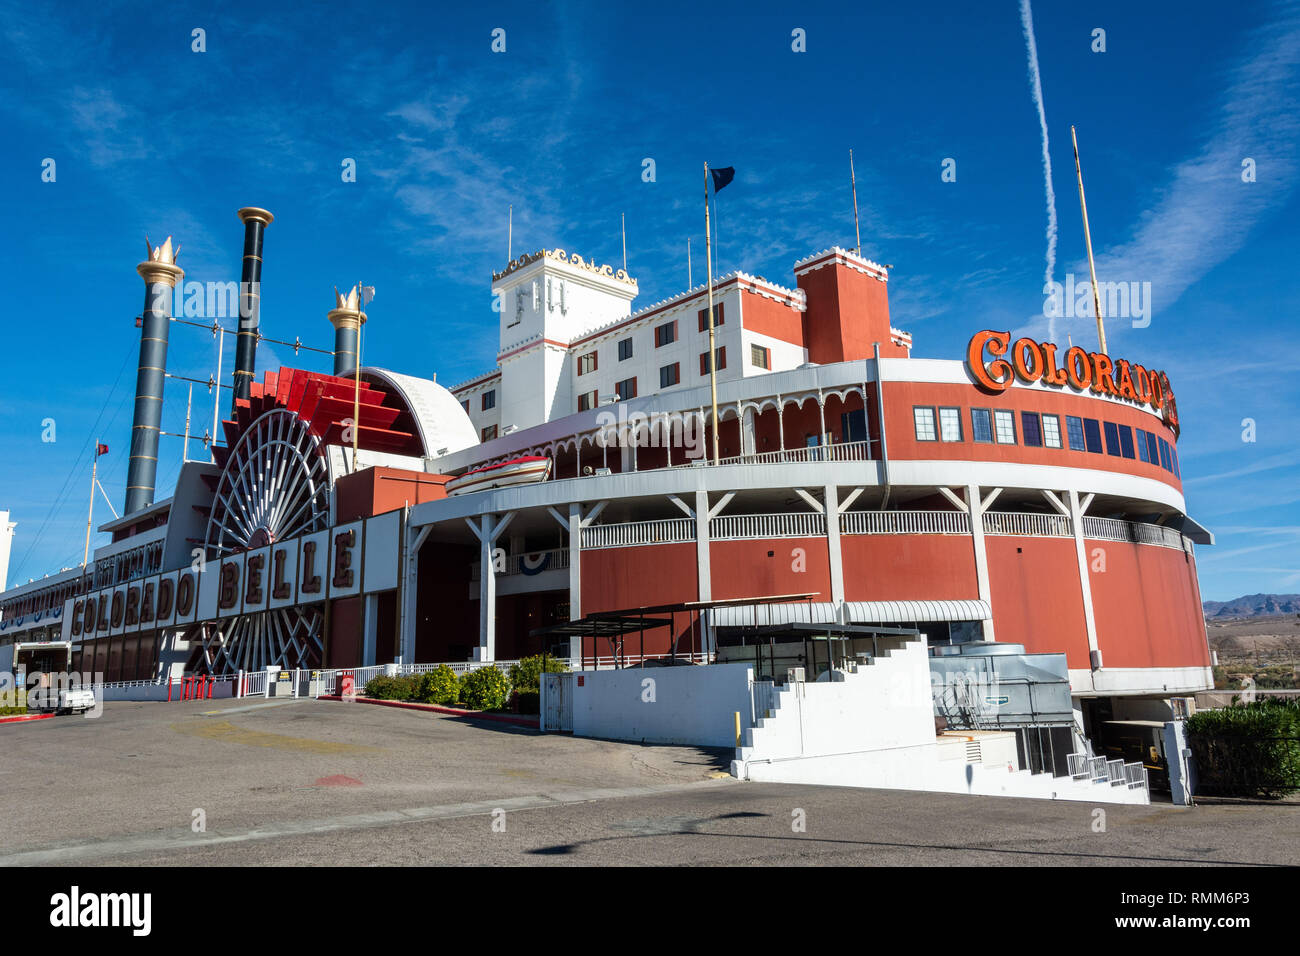 Laughlin, Nevada, United States of America - January 6, 2017. Exterior view of Colorado Belle hotel in Laughlin, NV. Stock Photo